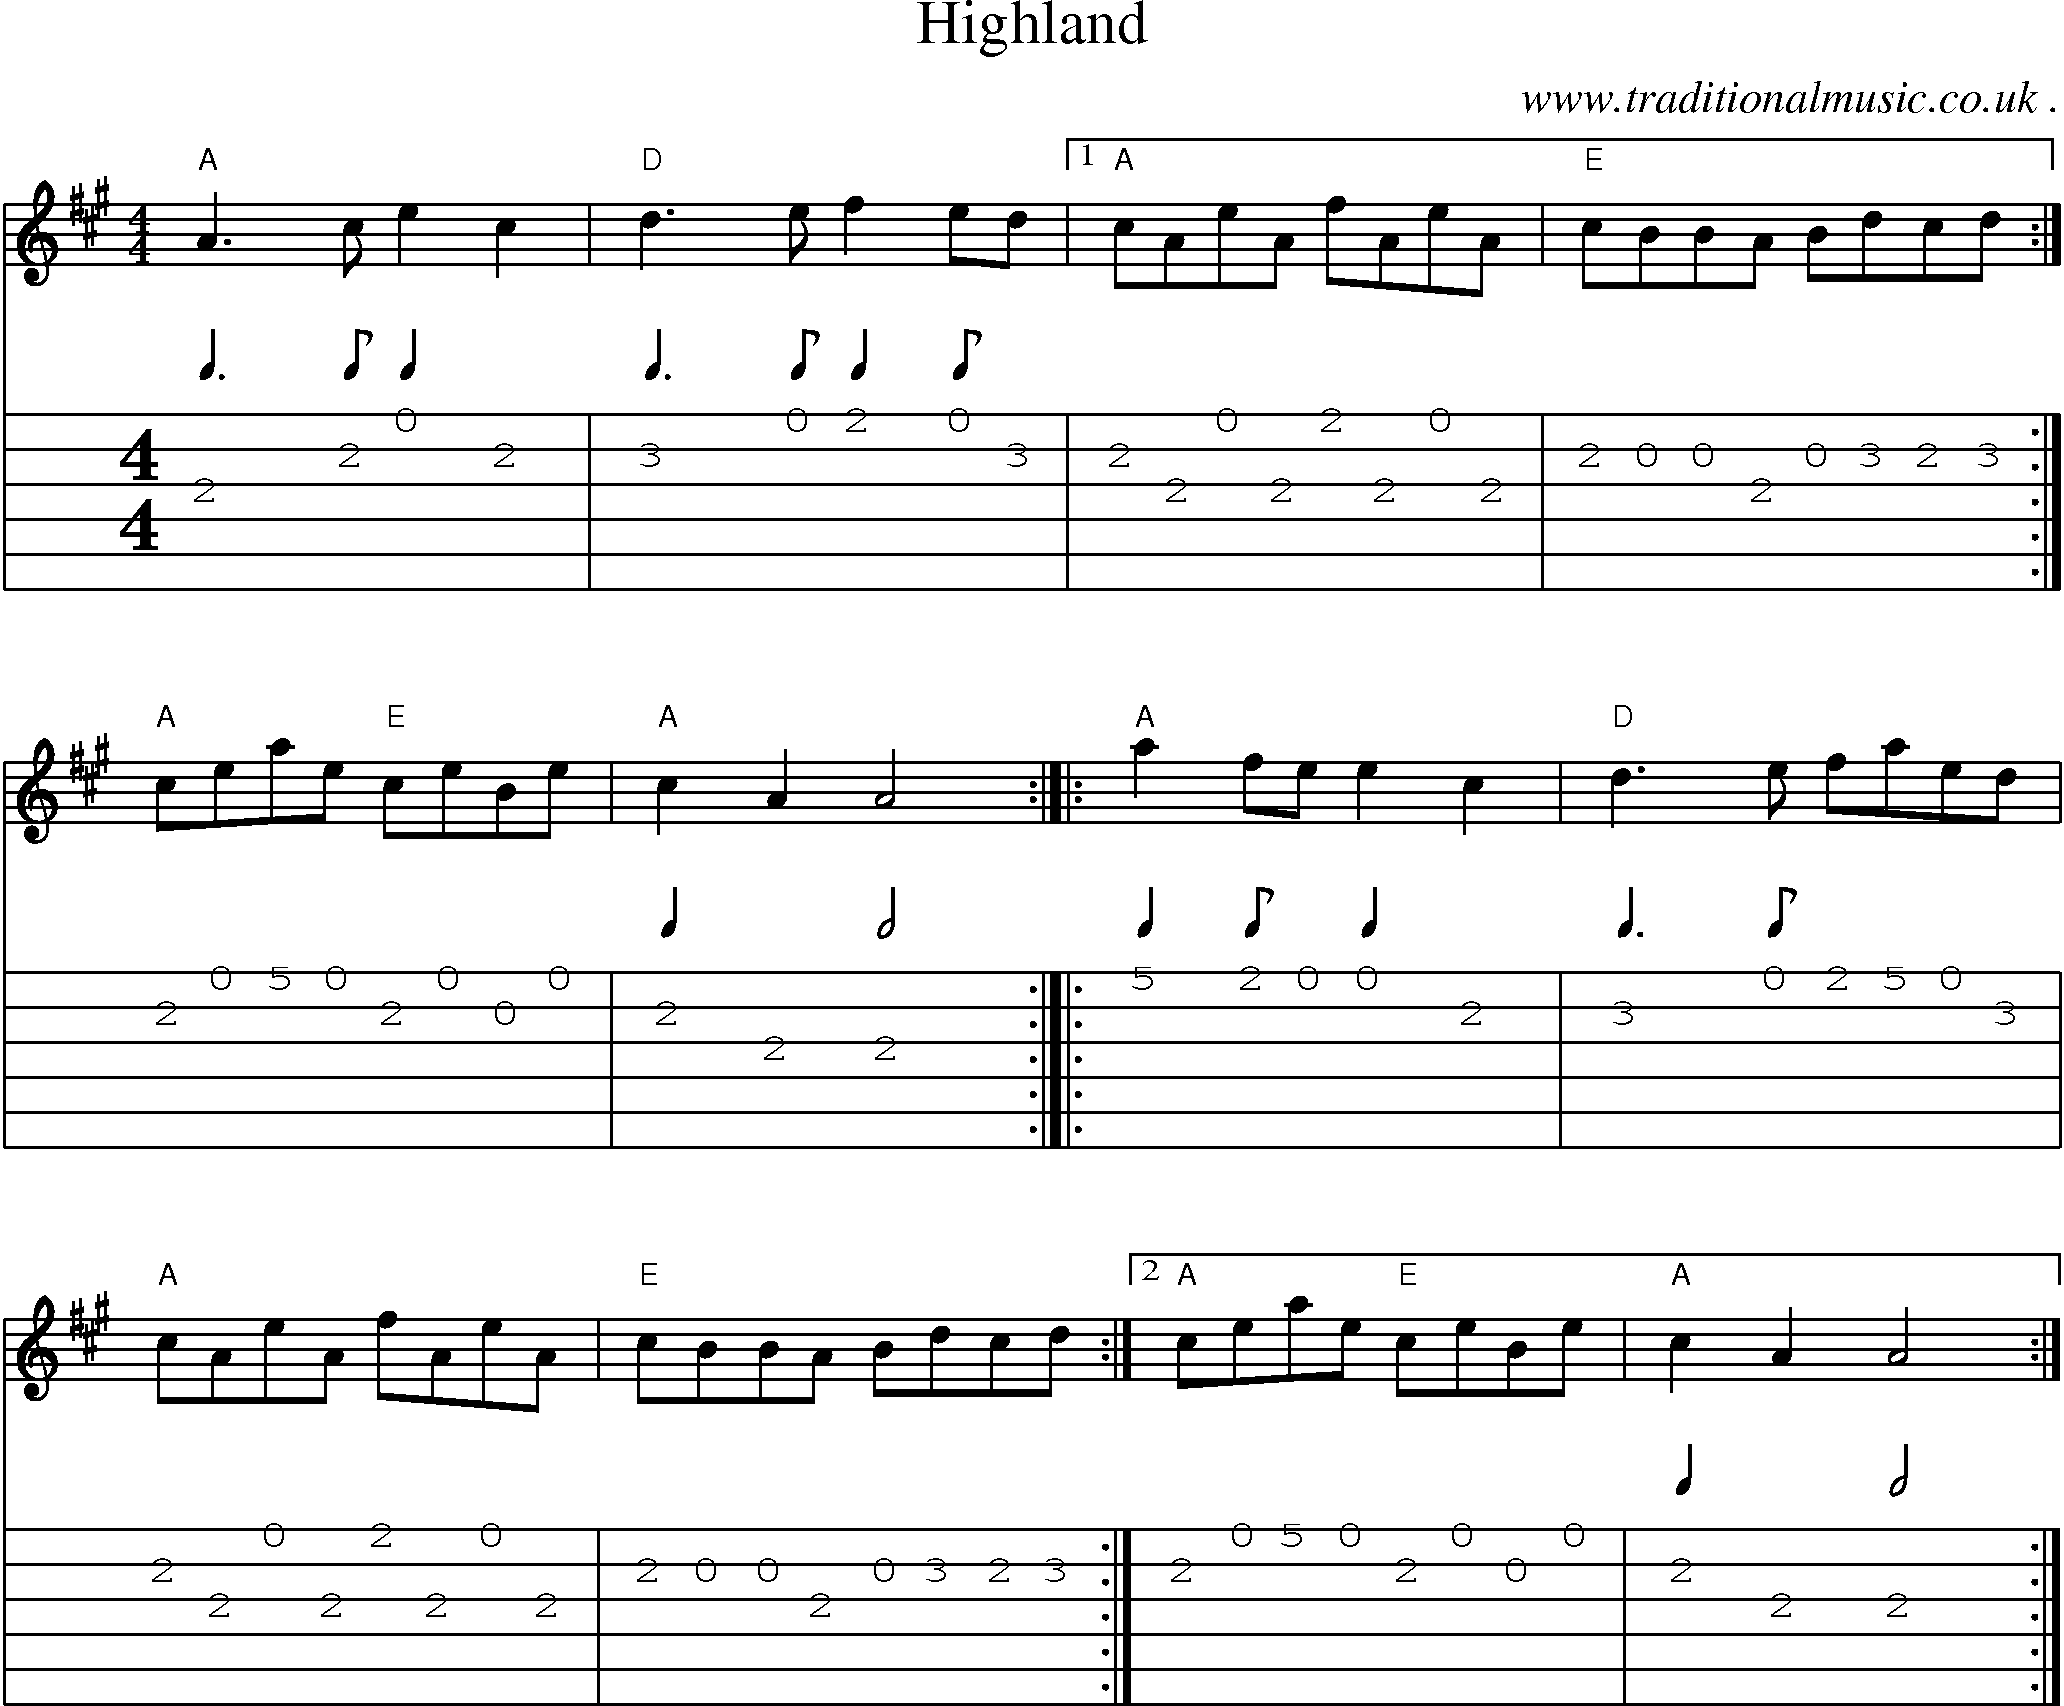 Music Score and Guitar Tabs for Highland